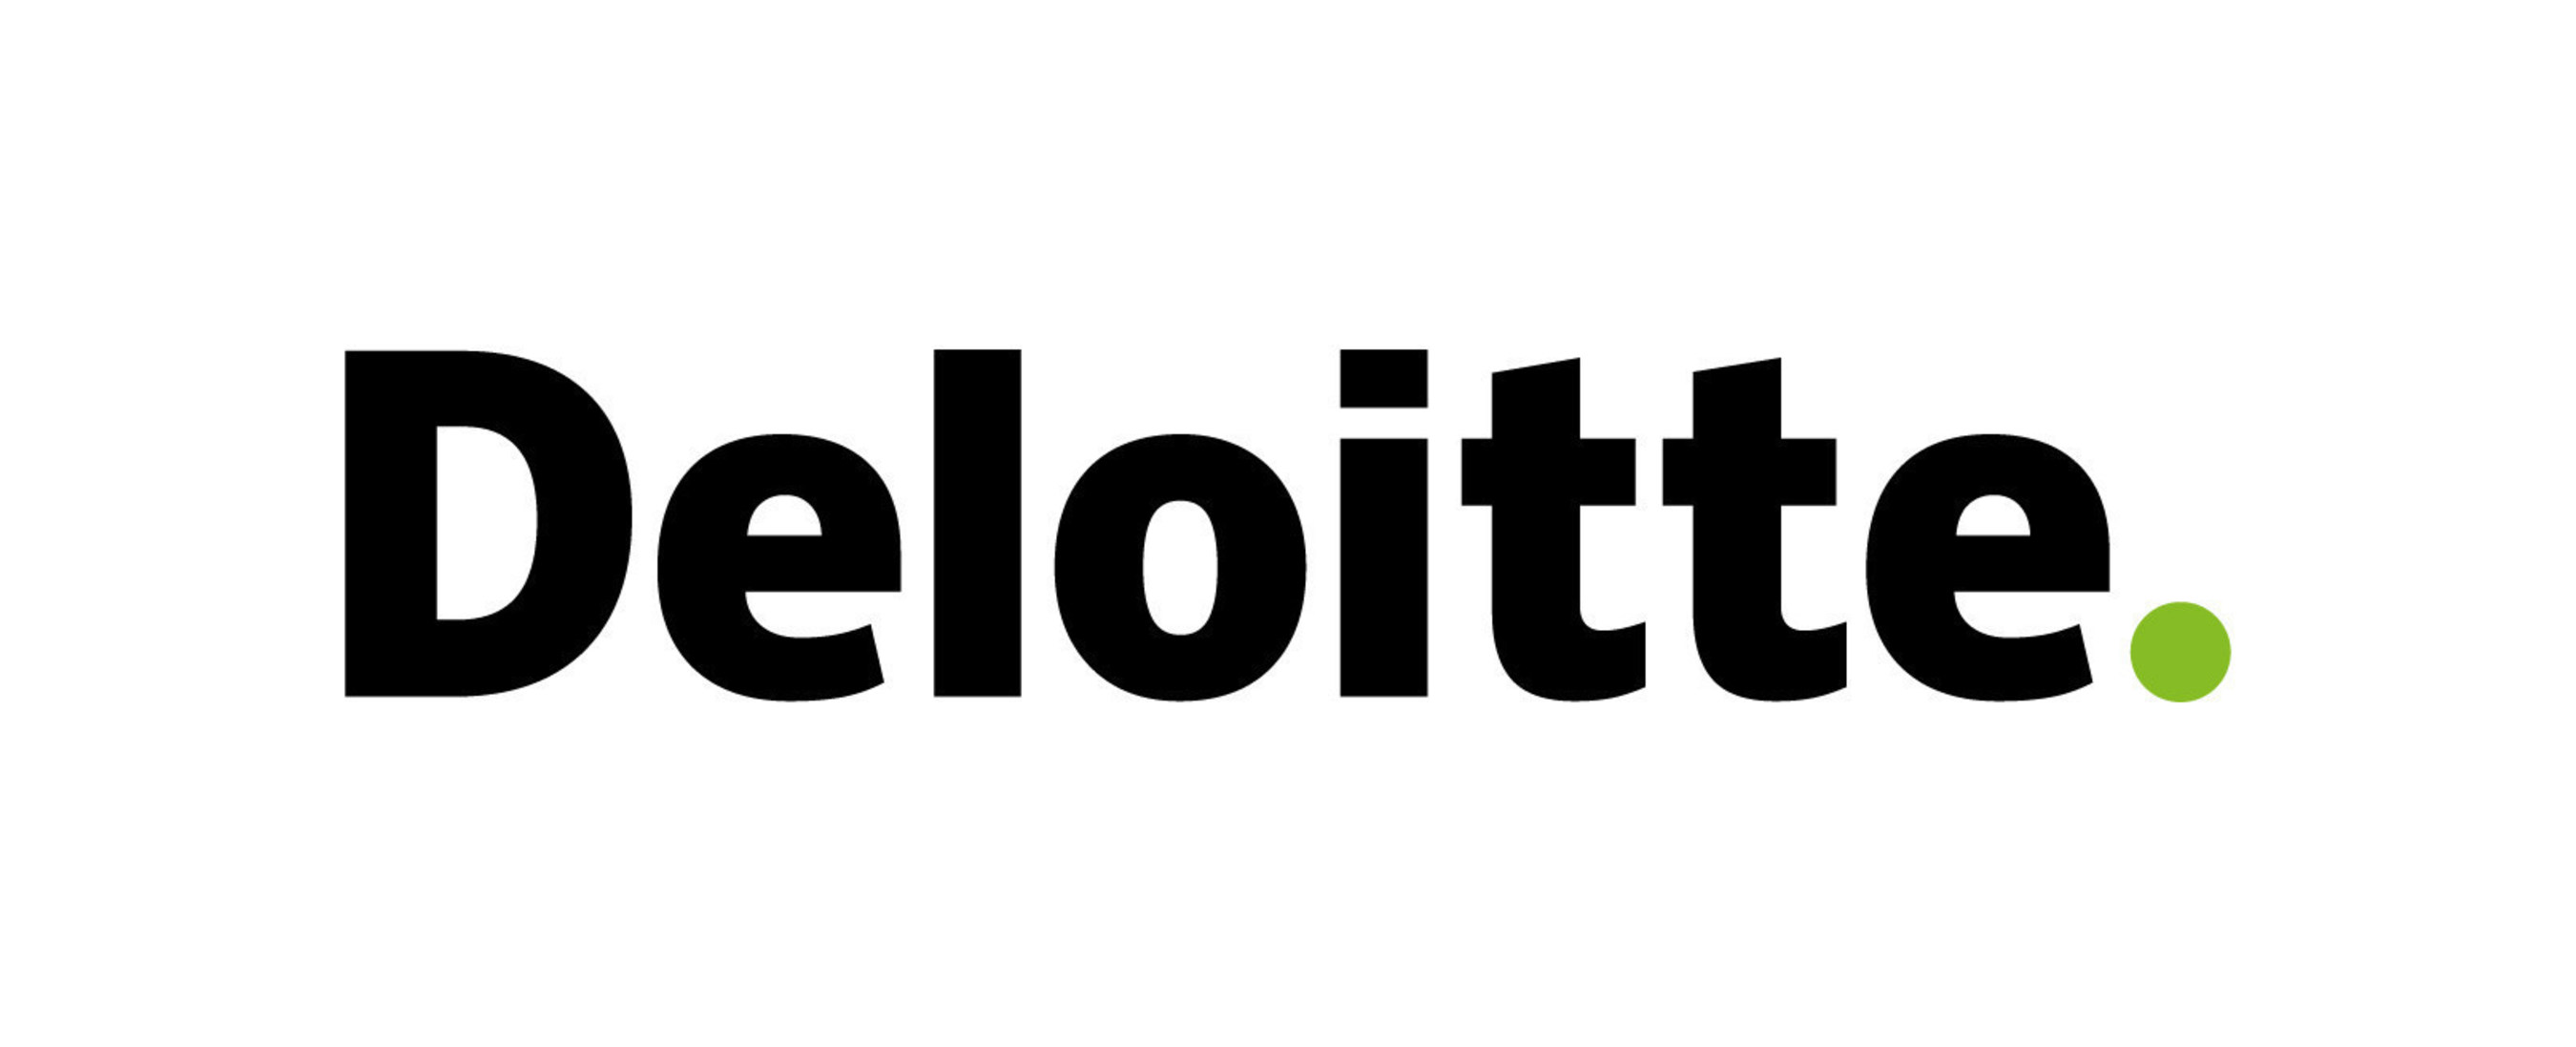 As used in this document, &quot;Deloitte&quot; means Deloitte LLP. Please see www.deloitte.com/us/about for a detailed description of the legal structure of Deloitte LLP and its subsidiaries. Certain services may not be available to attest clients under the rules and regulations of public accounting.